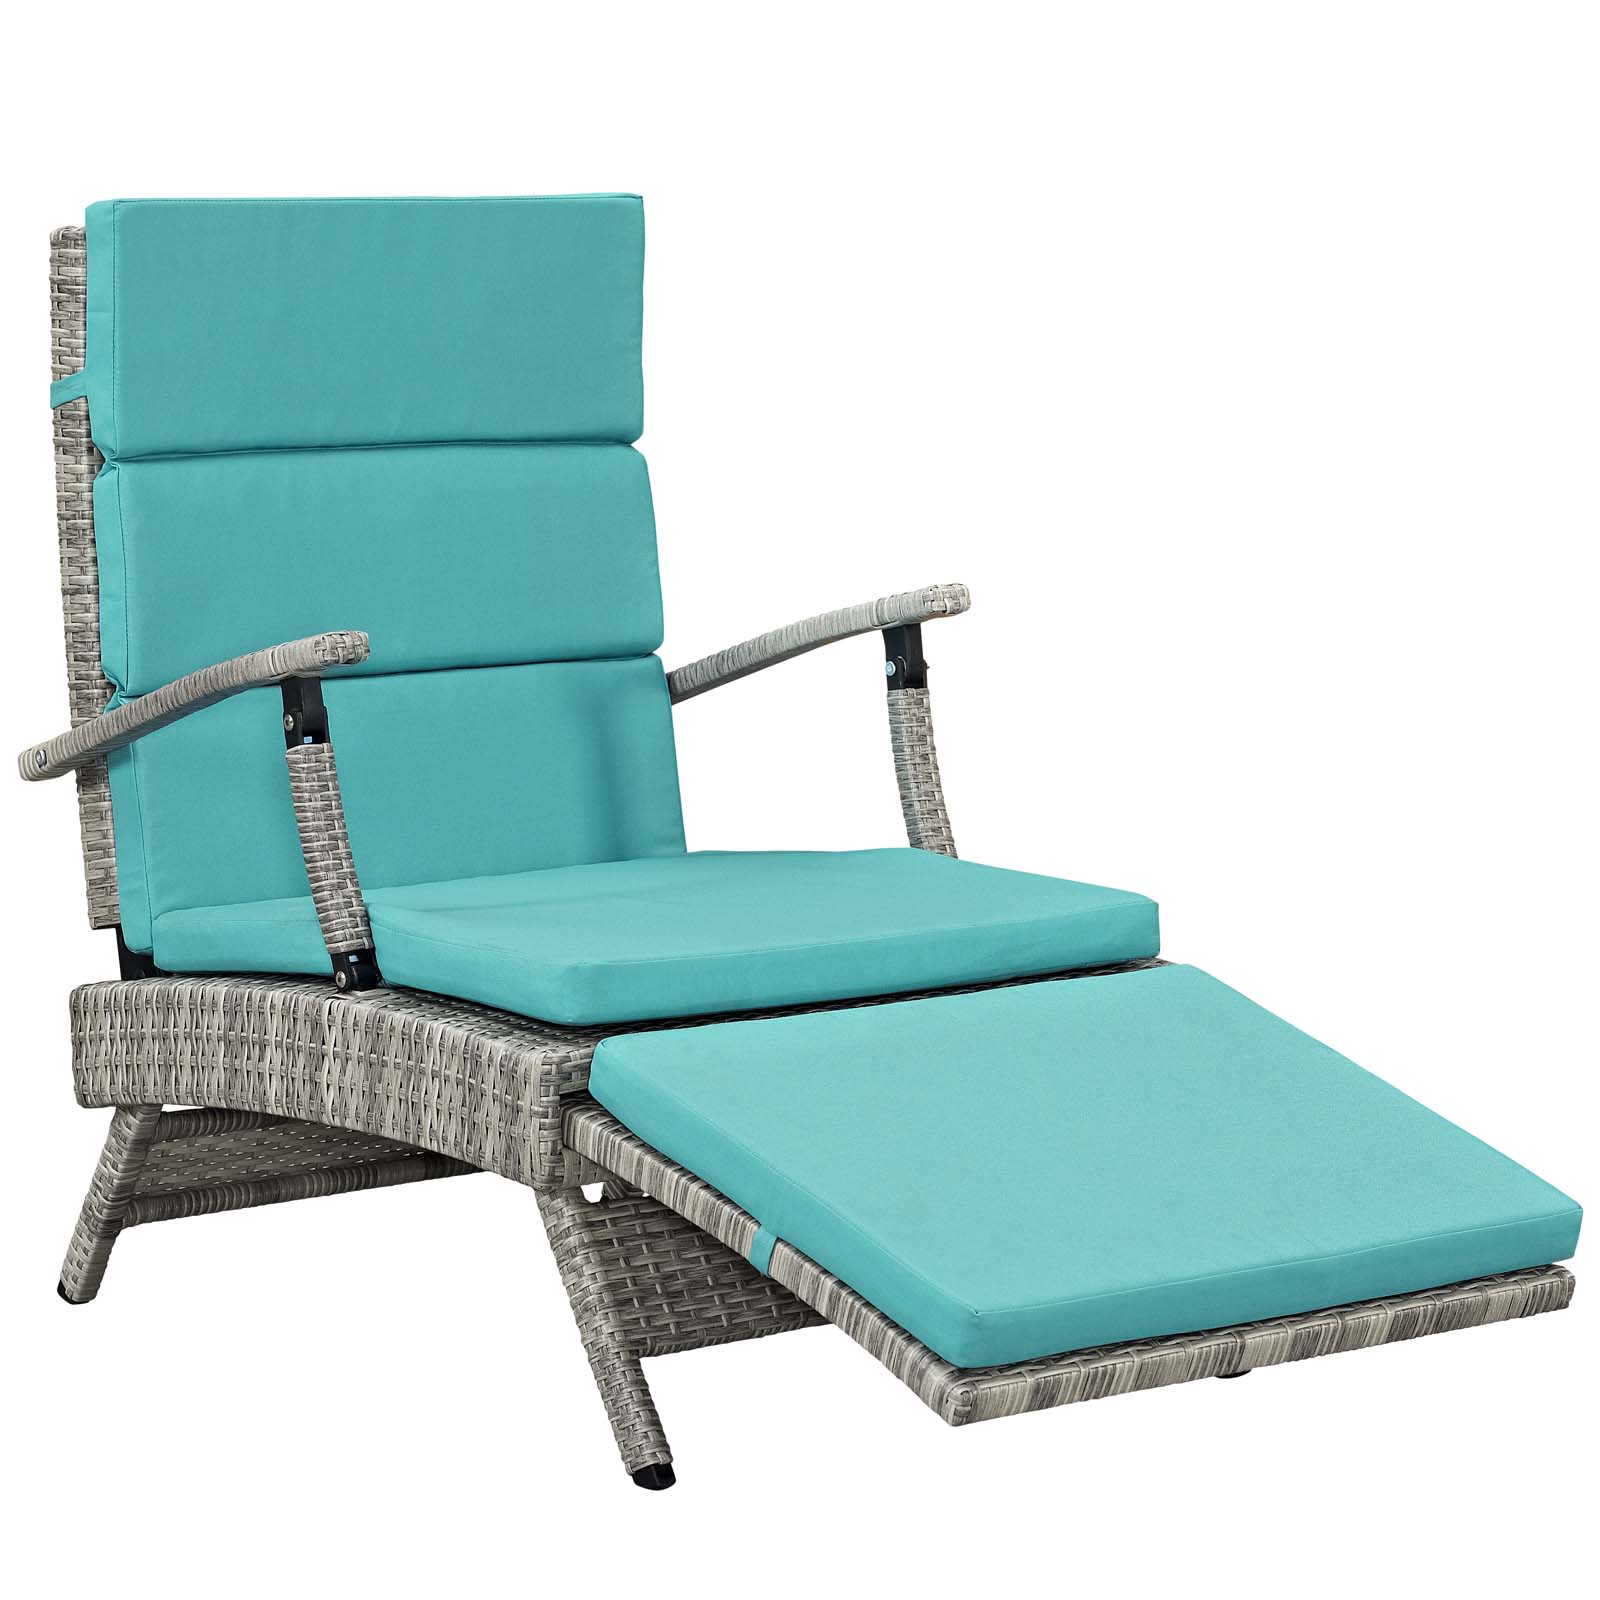 Modway Envisage Chaise Outdoor Patio Wicker Rattan Lounge Chair in Light Gray Turquoise - image 2 of 10